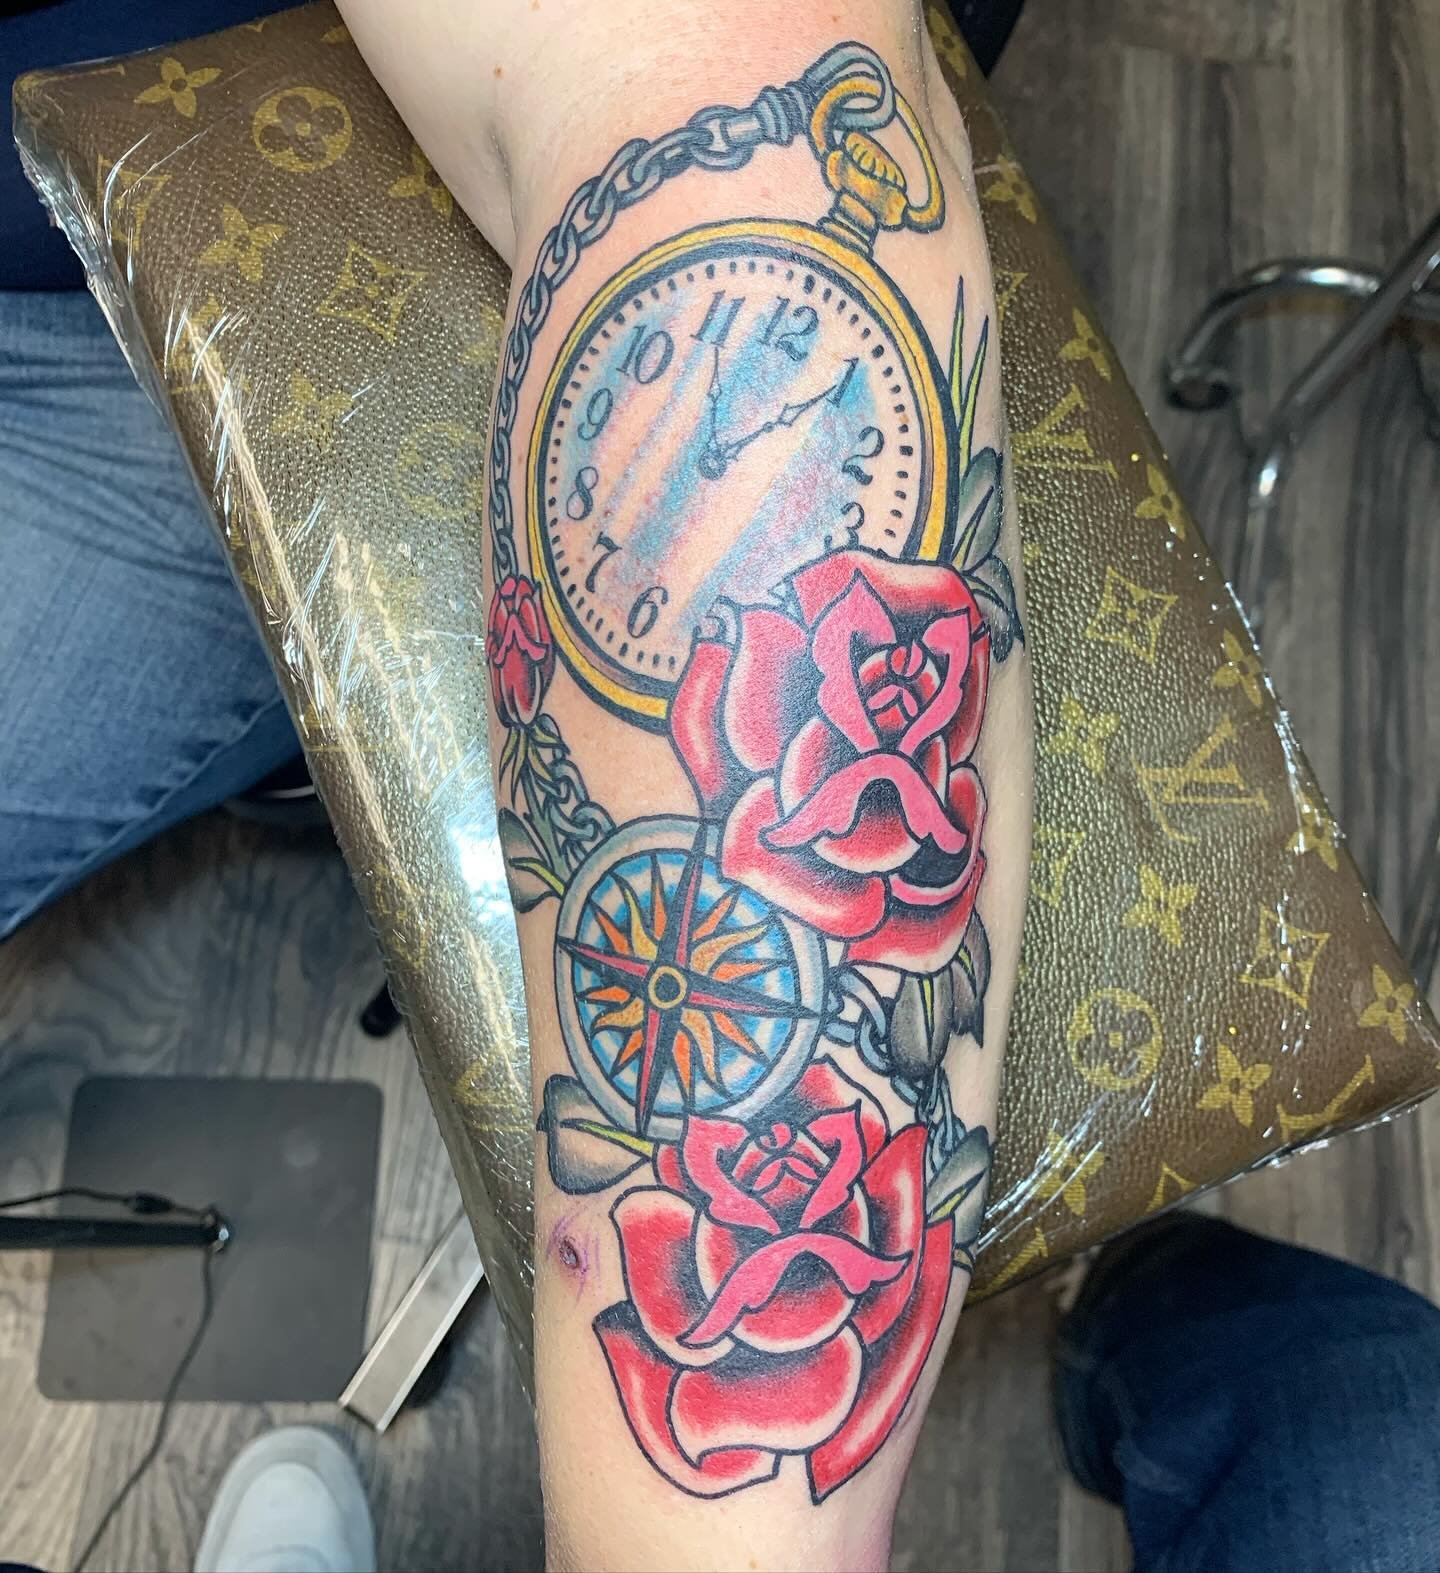 I think it was Willy Wonka who once said, &ldquo;Time is a precious thing- never waste it.&rdquo; That kook knew some shit. Anyway, here&rsquo;s some relatable content by Bradley Pauley! 

For appointments, please DM @bradleypauley directly or email 